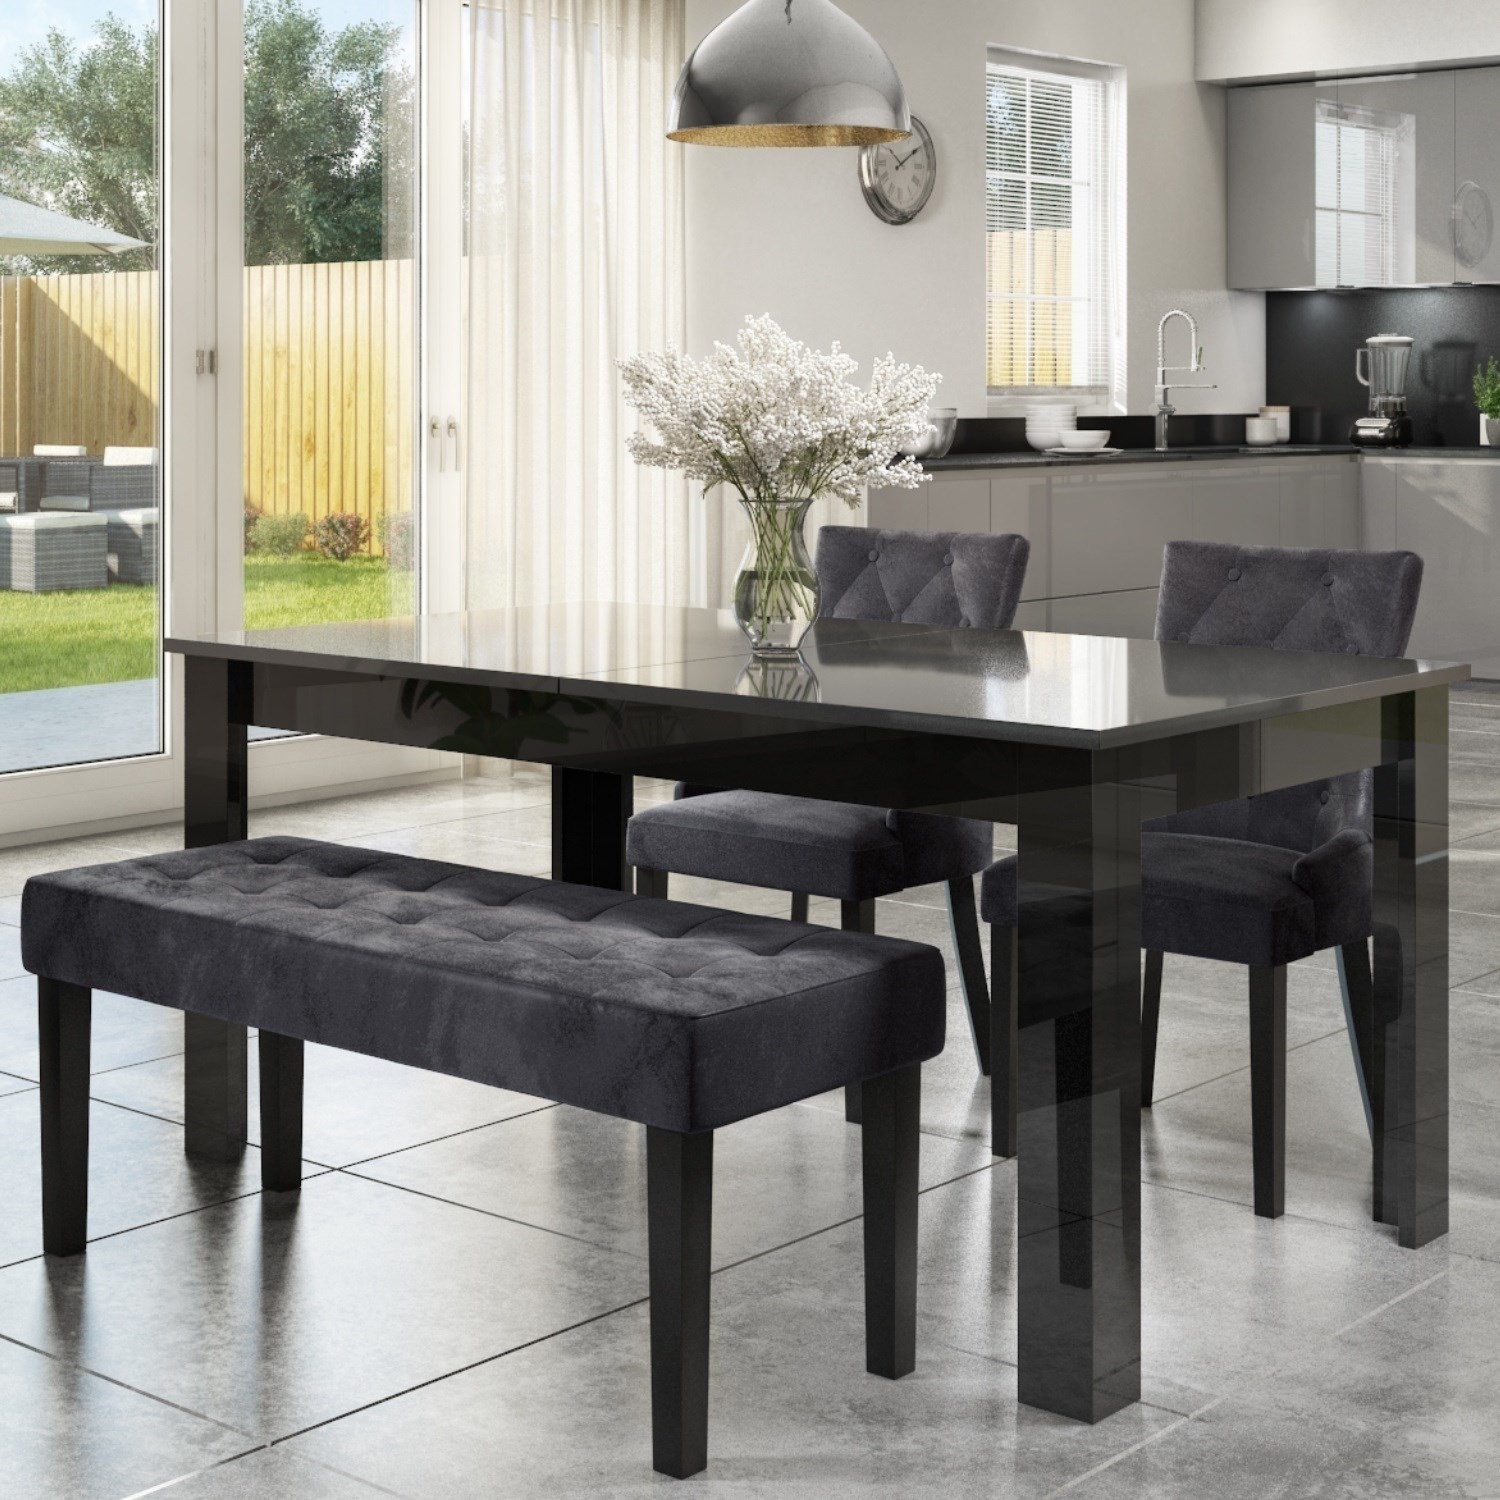 High Gloss With 2 Grey Velvet Chairs, Black High Gloss Dining Table And Chairs